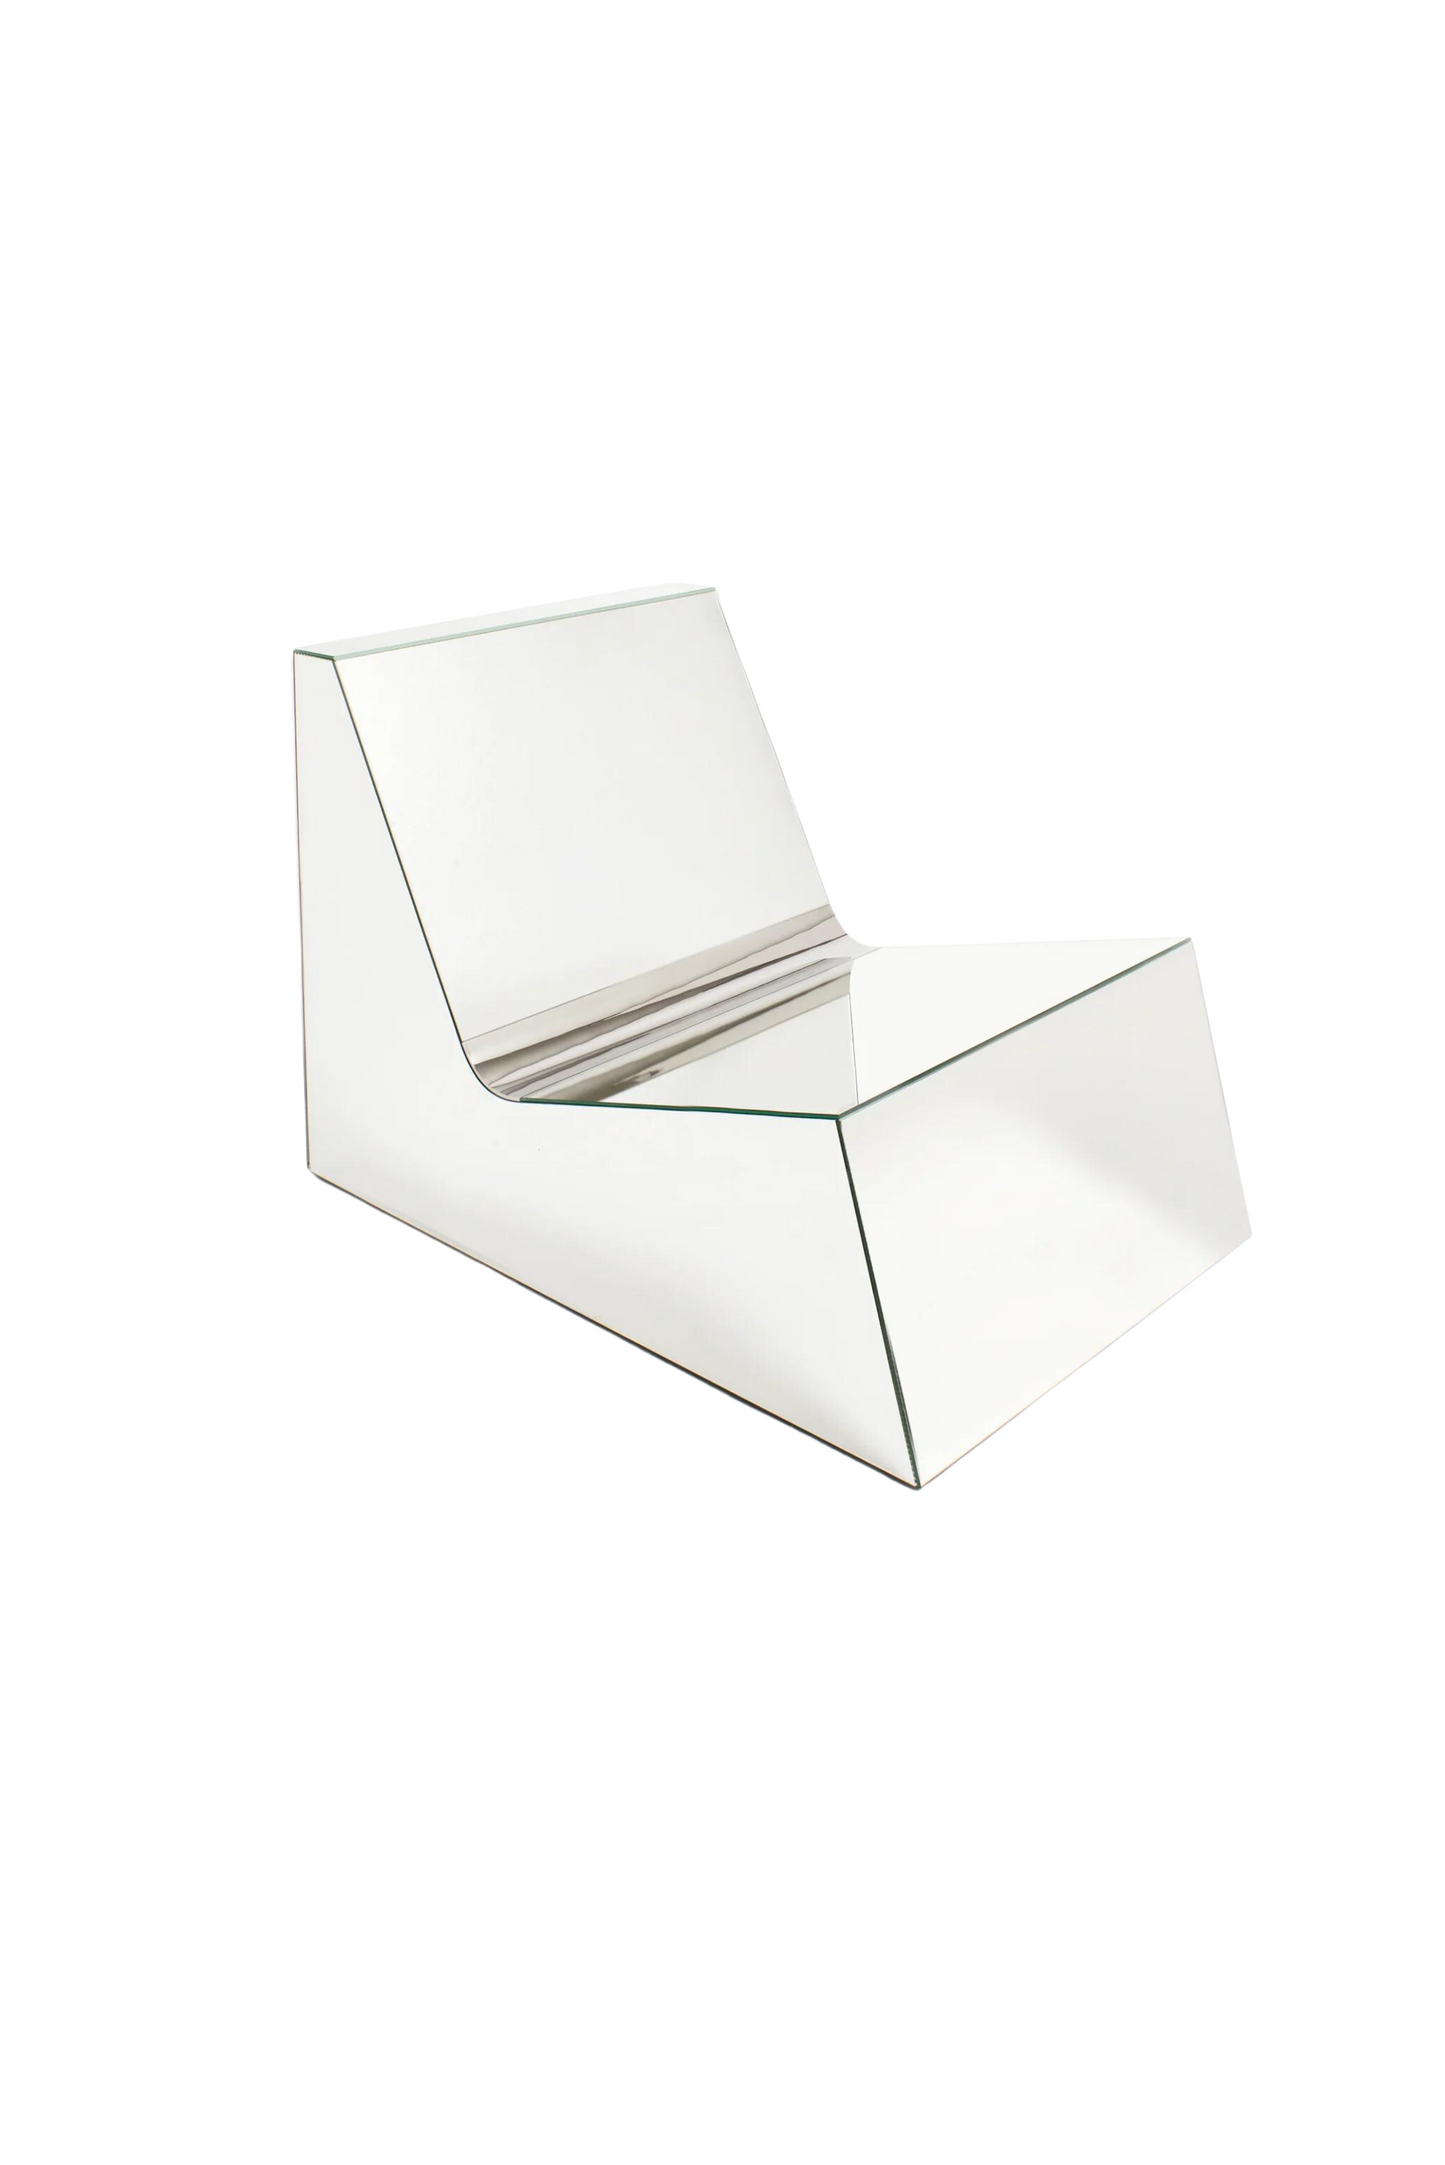 PROJECT 213A // MIRROR LOUNGE CHAIR